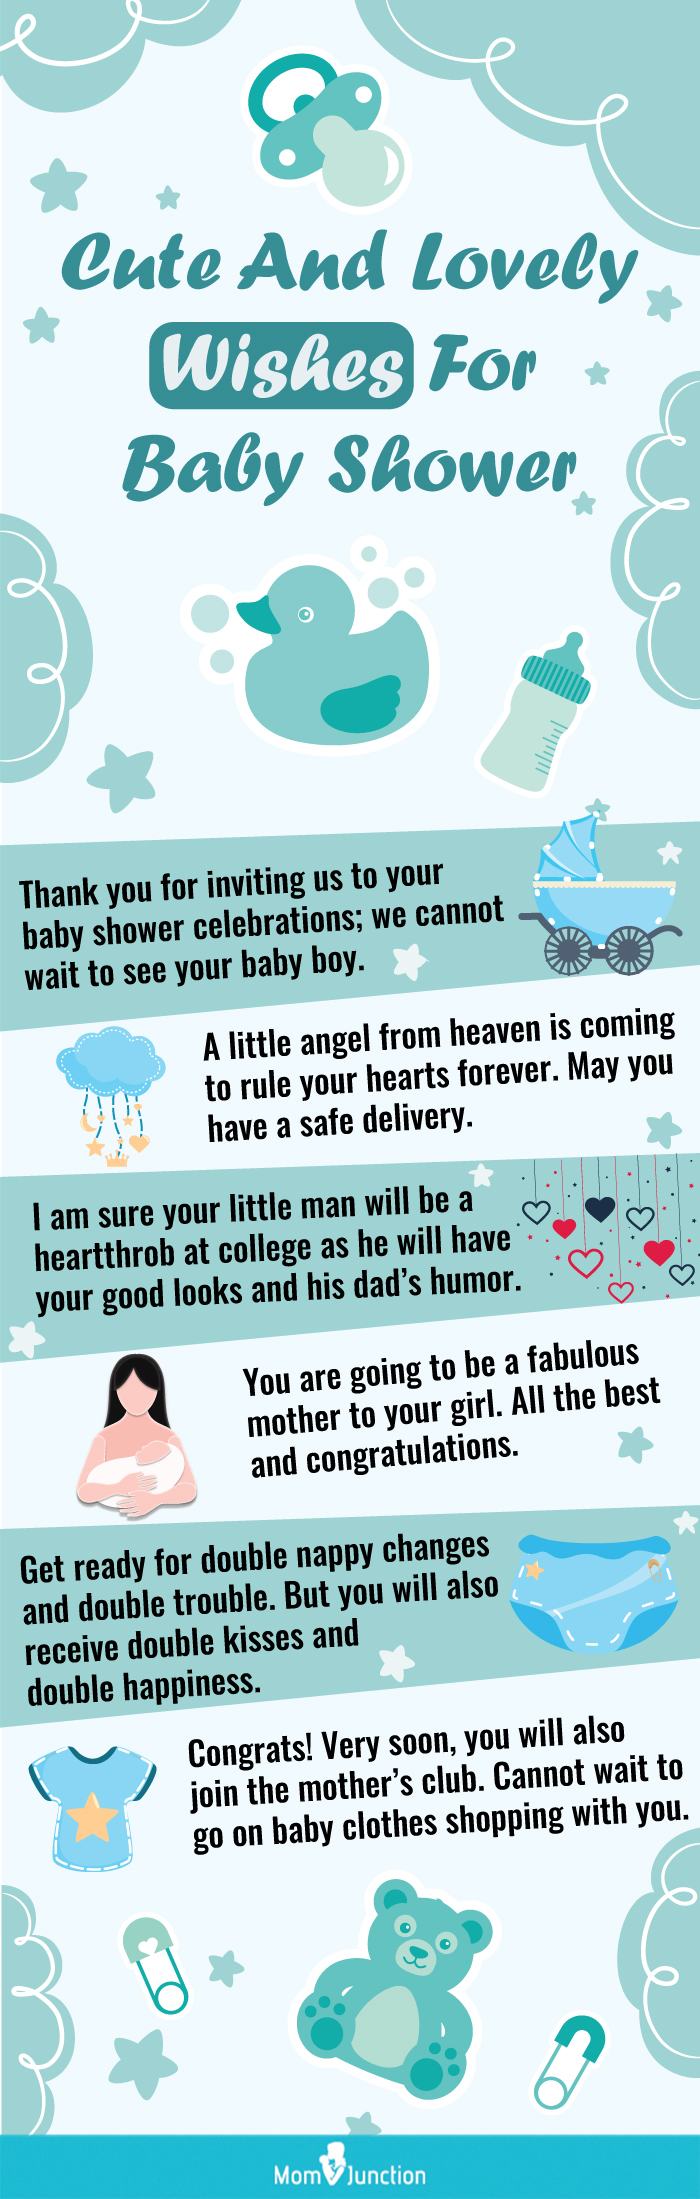 cute and lovely wishes for baby shower (infographic)